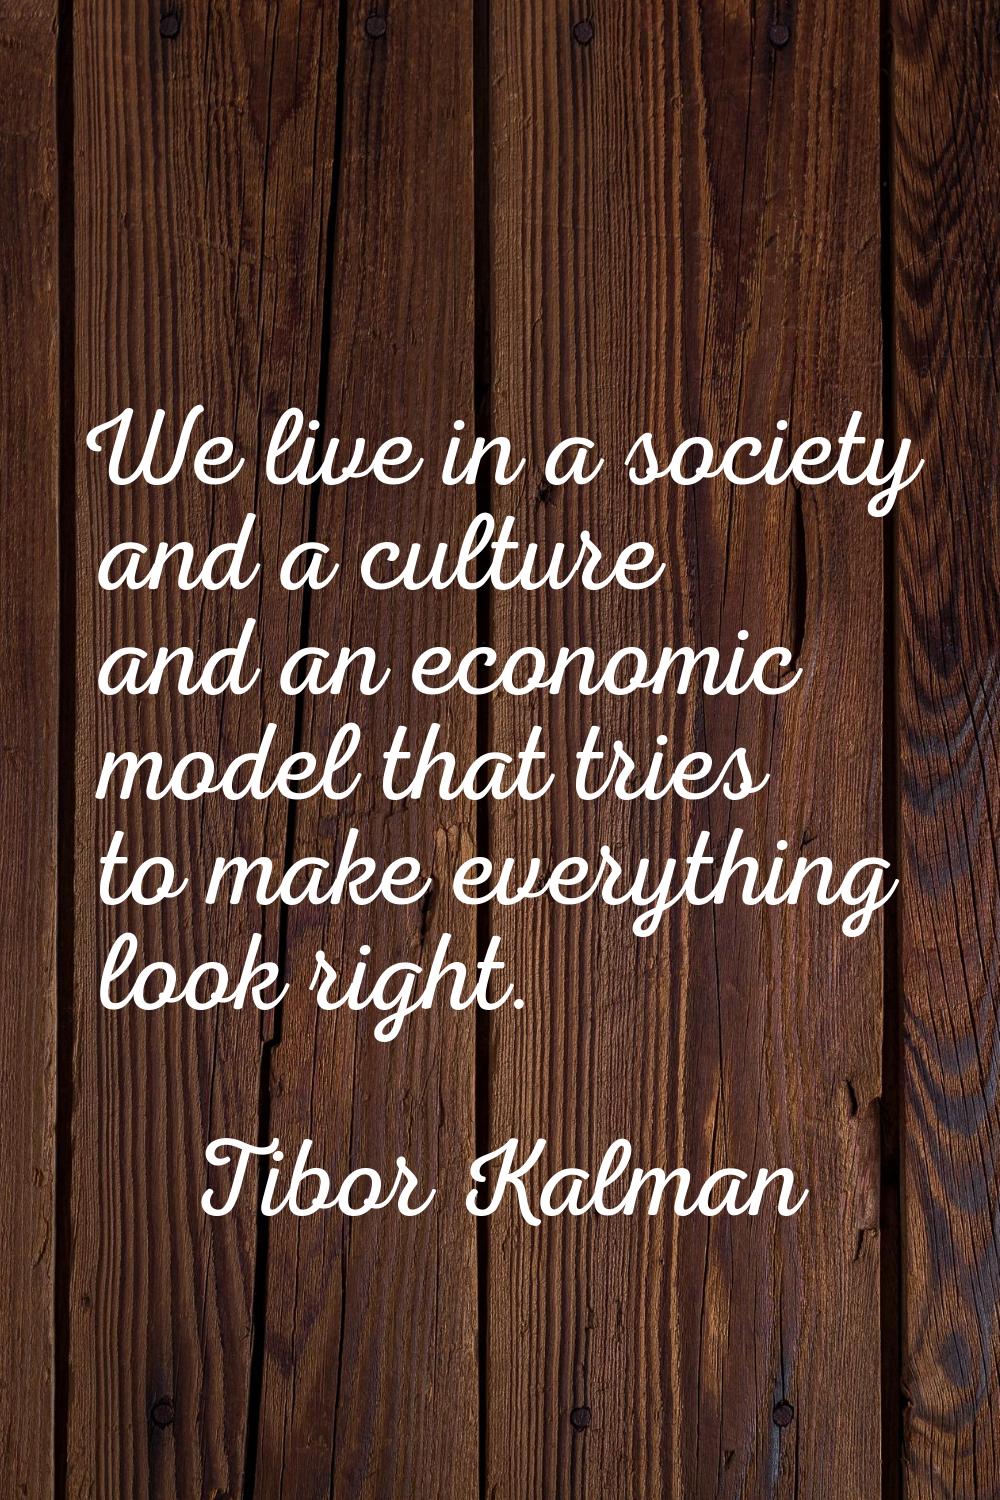 We live in a society and a culture and an economic model that tries to make everything look right.